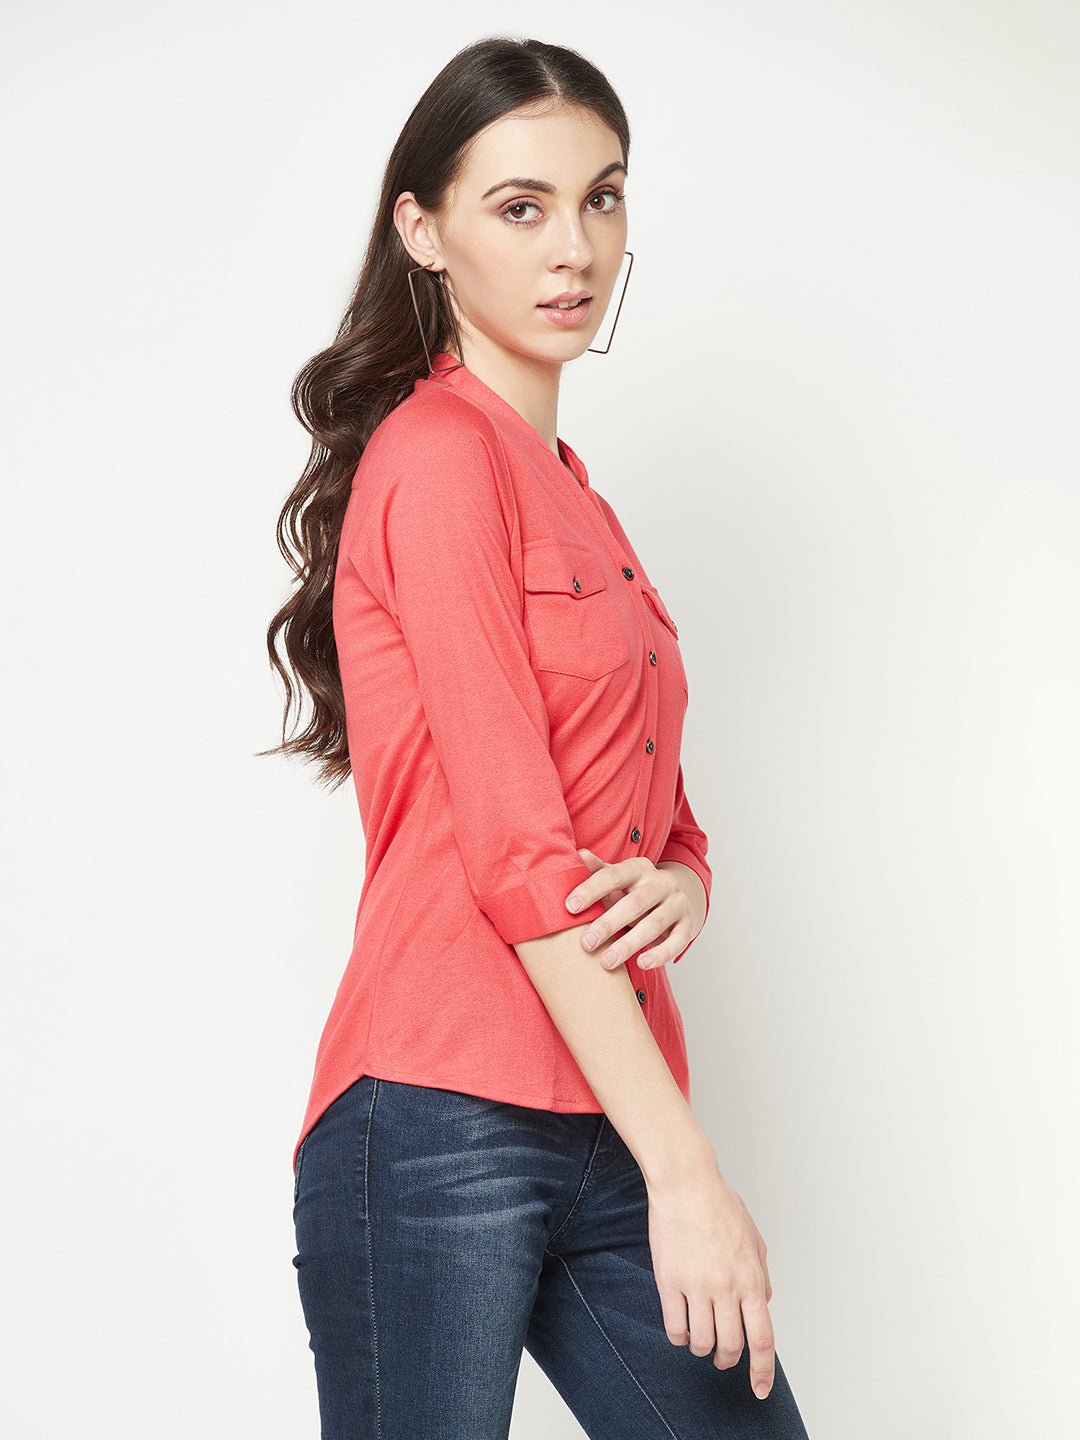  Pink Shirt Style Top